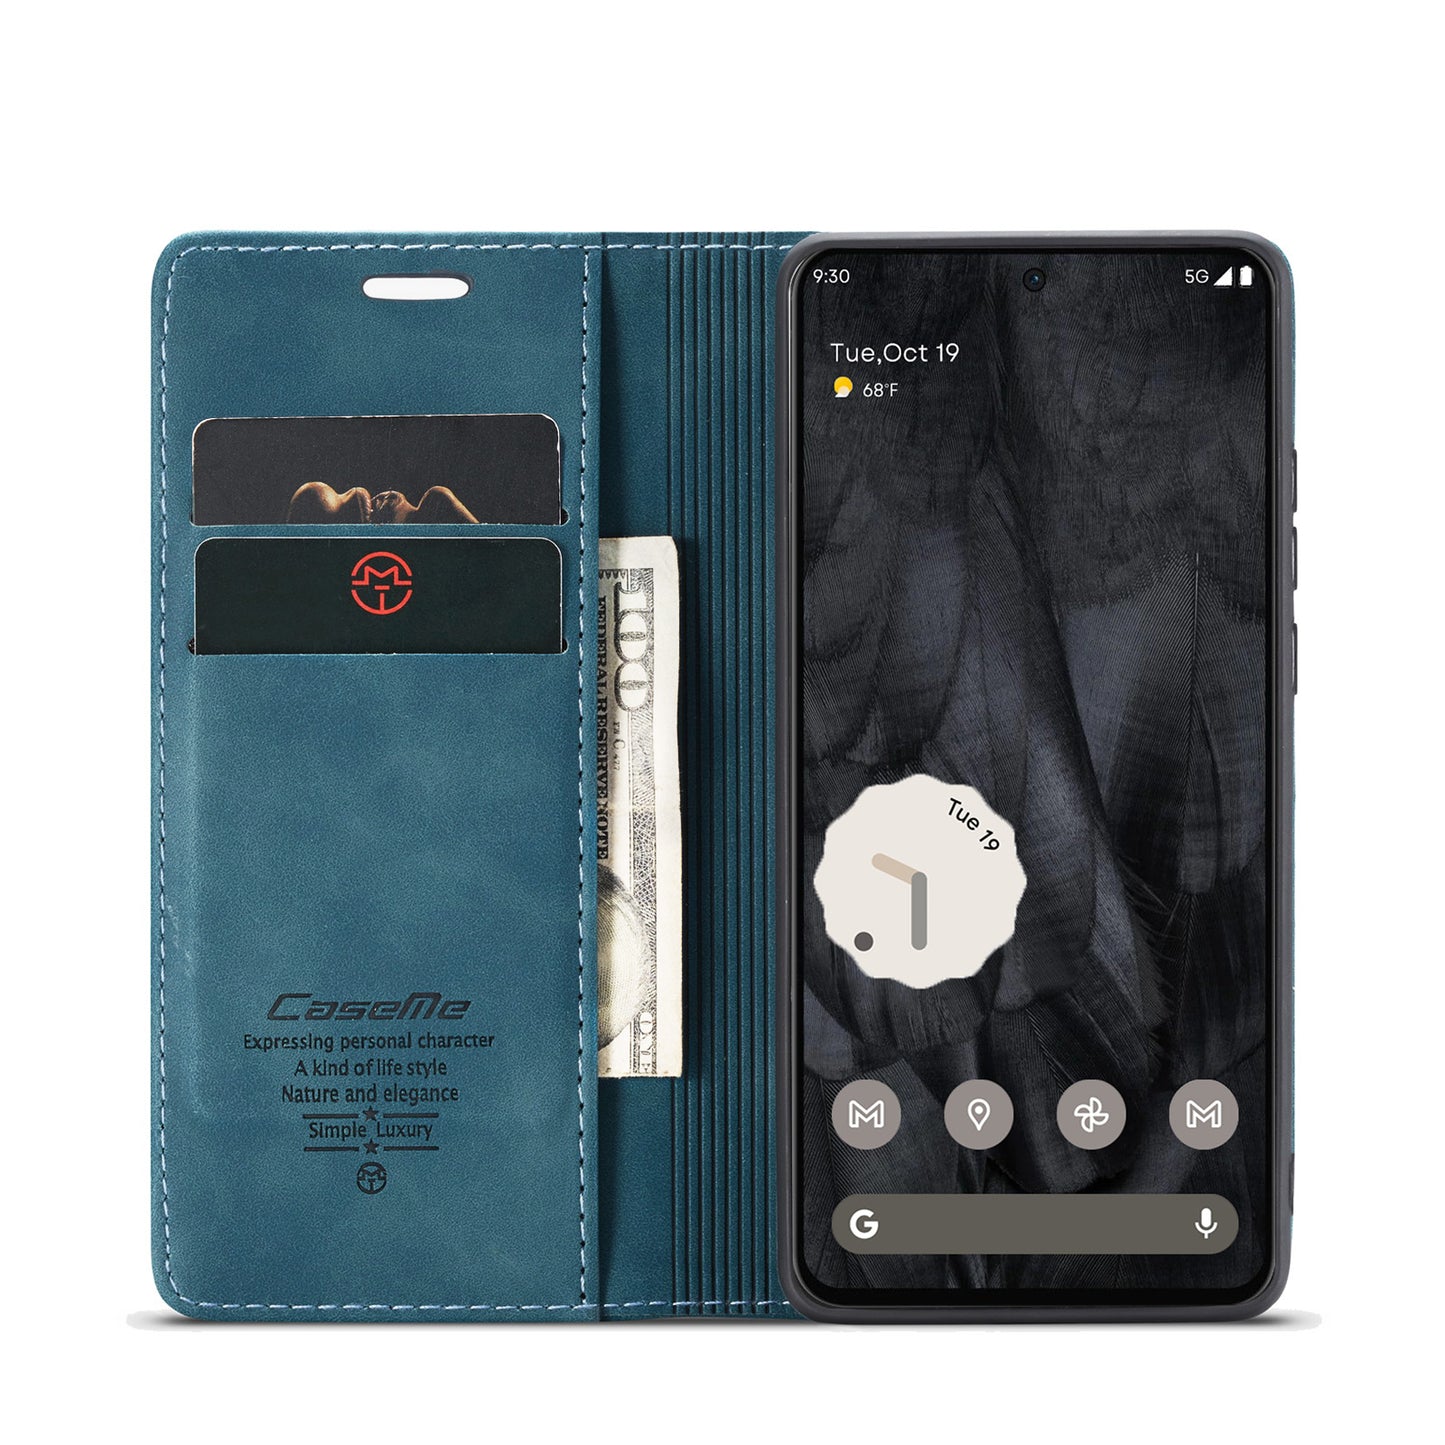 Book Classical Google Pixel 8 Pro Leather Case Retro Slim Wallet Stand